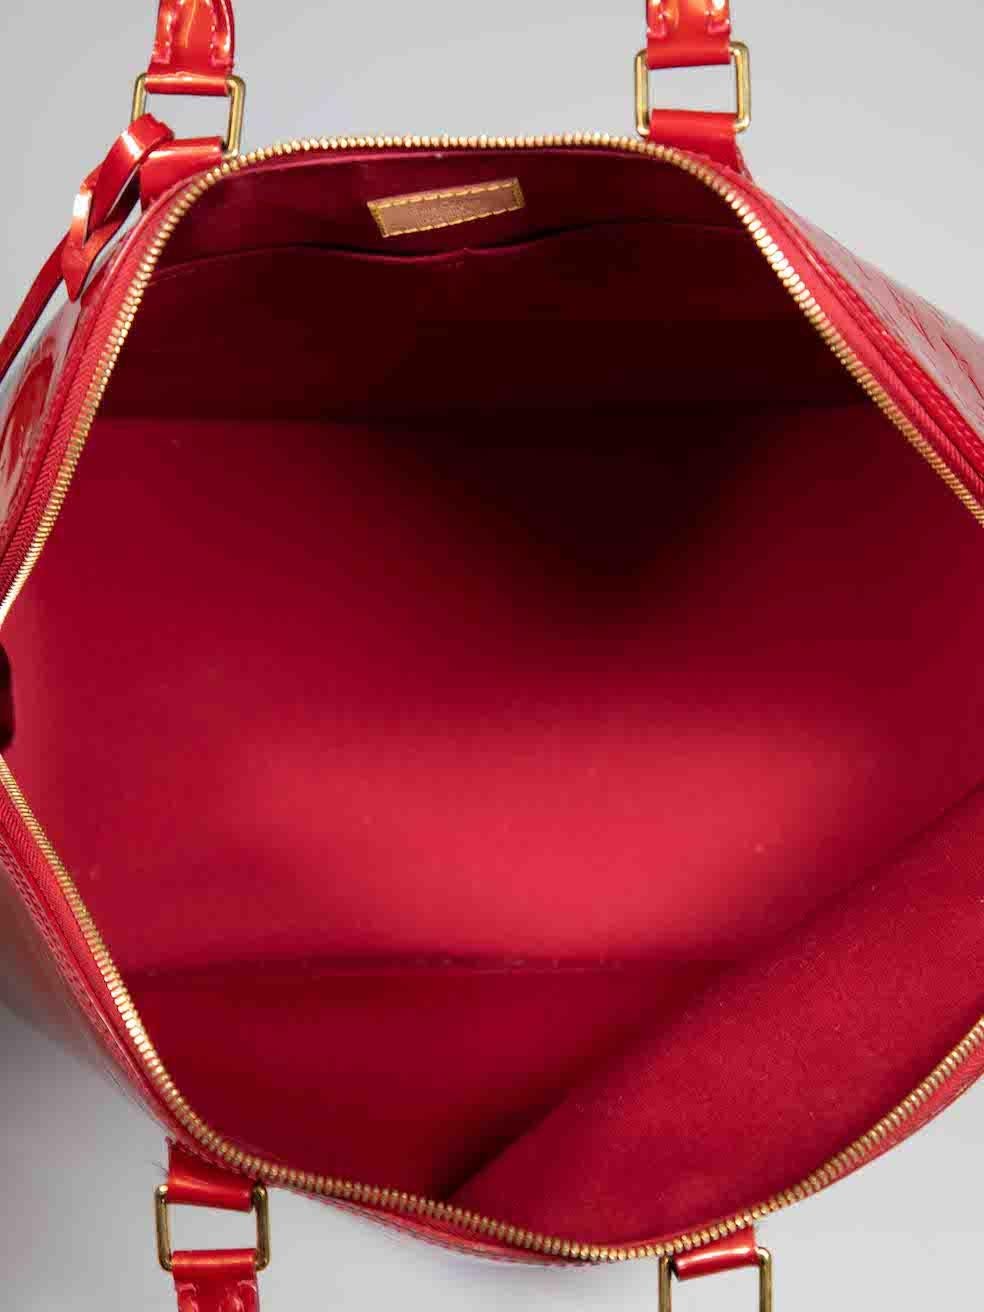 Louis Vuitton 2013 Red Patent Leather Vernis Alma GM For Sale 1